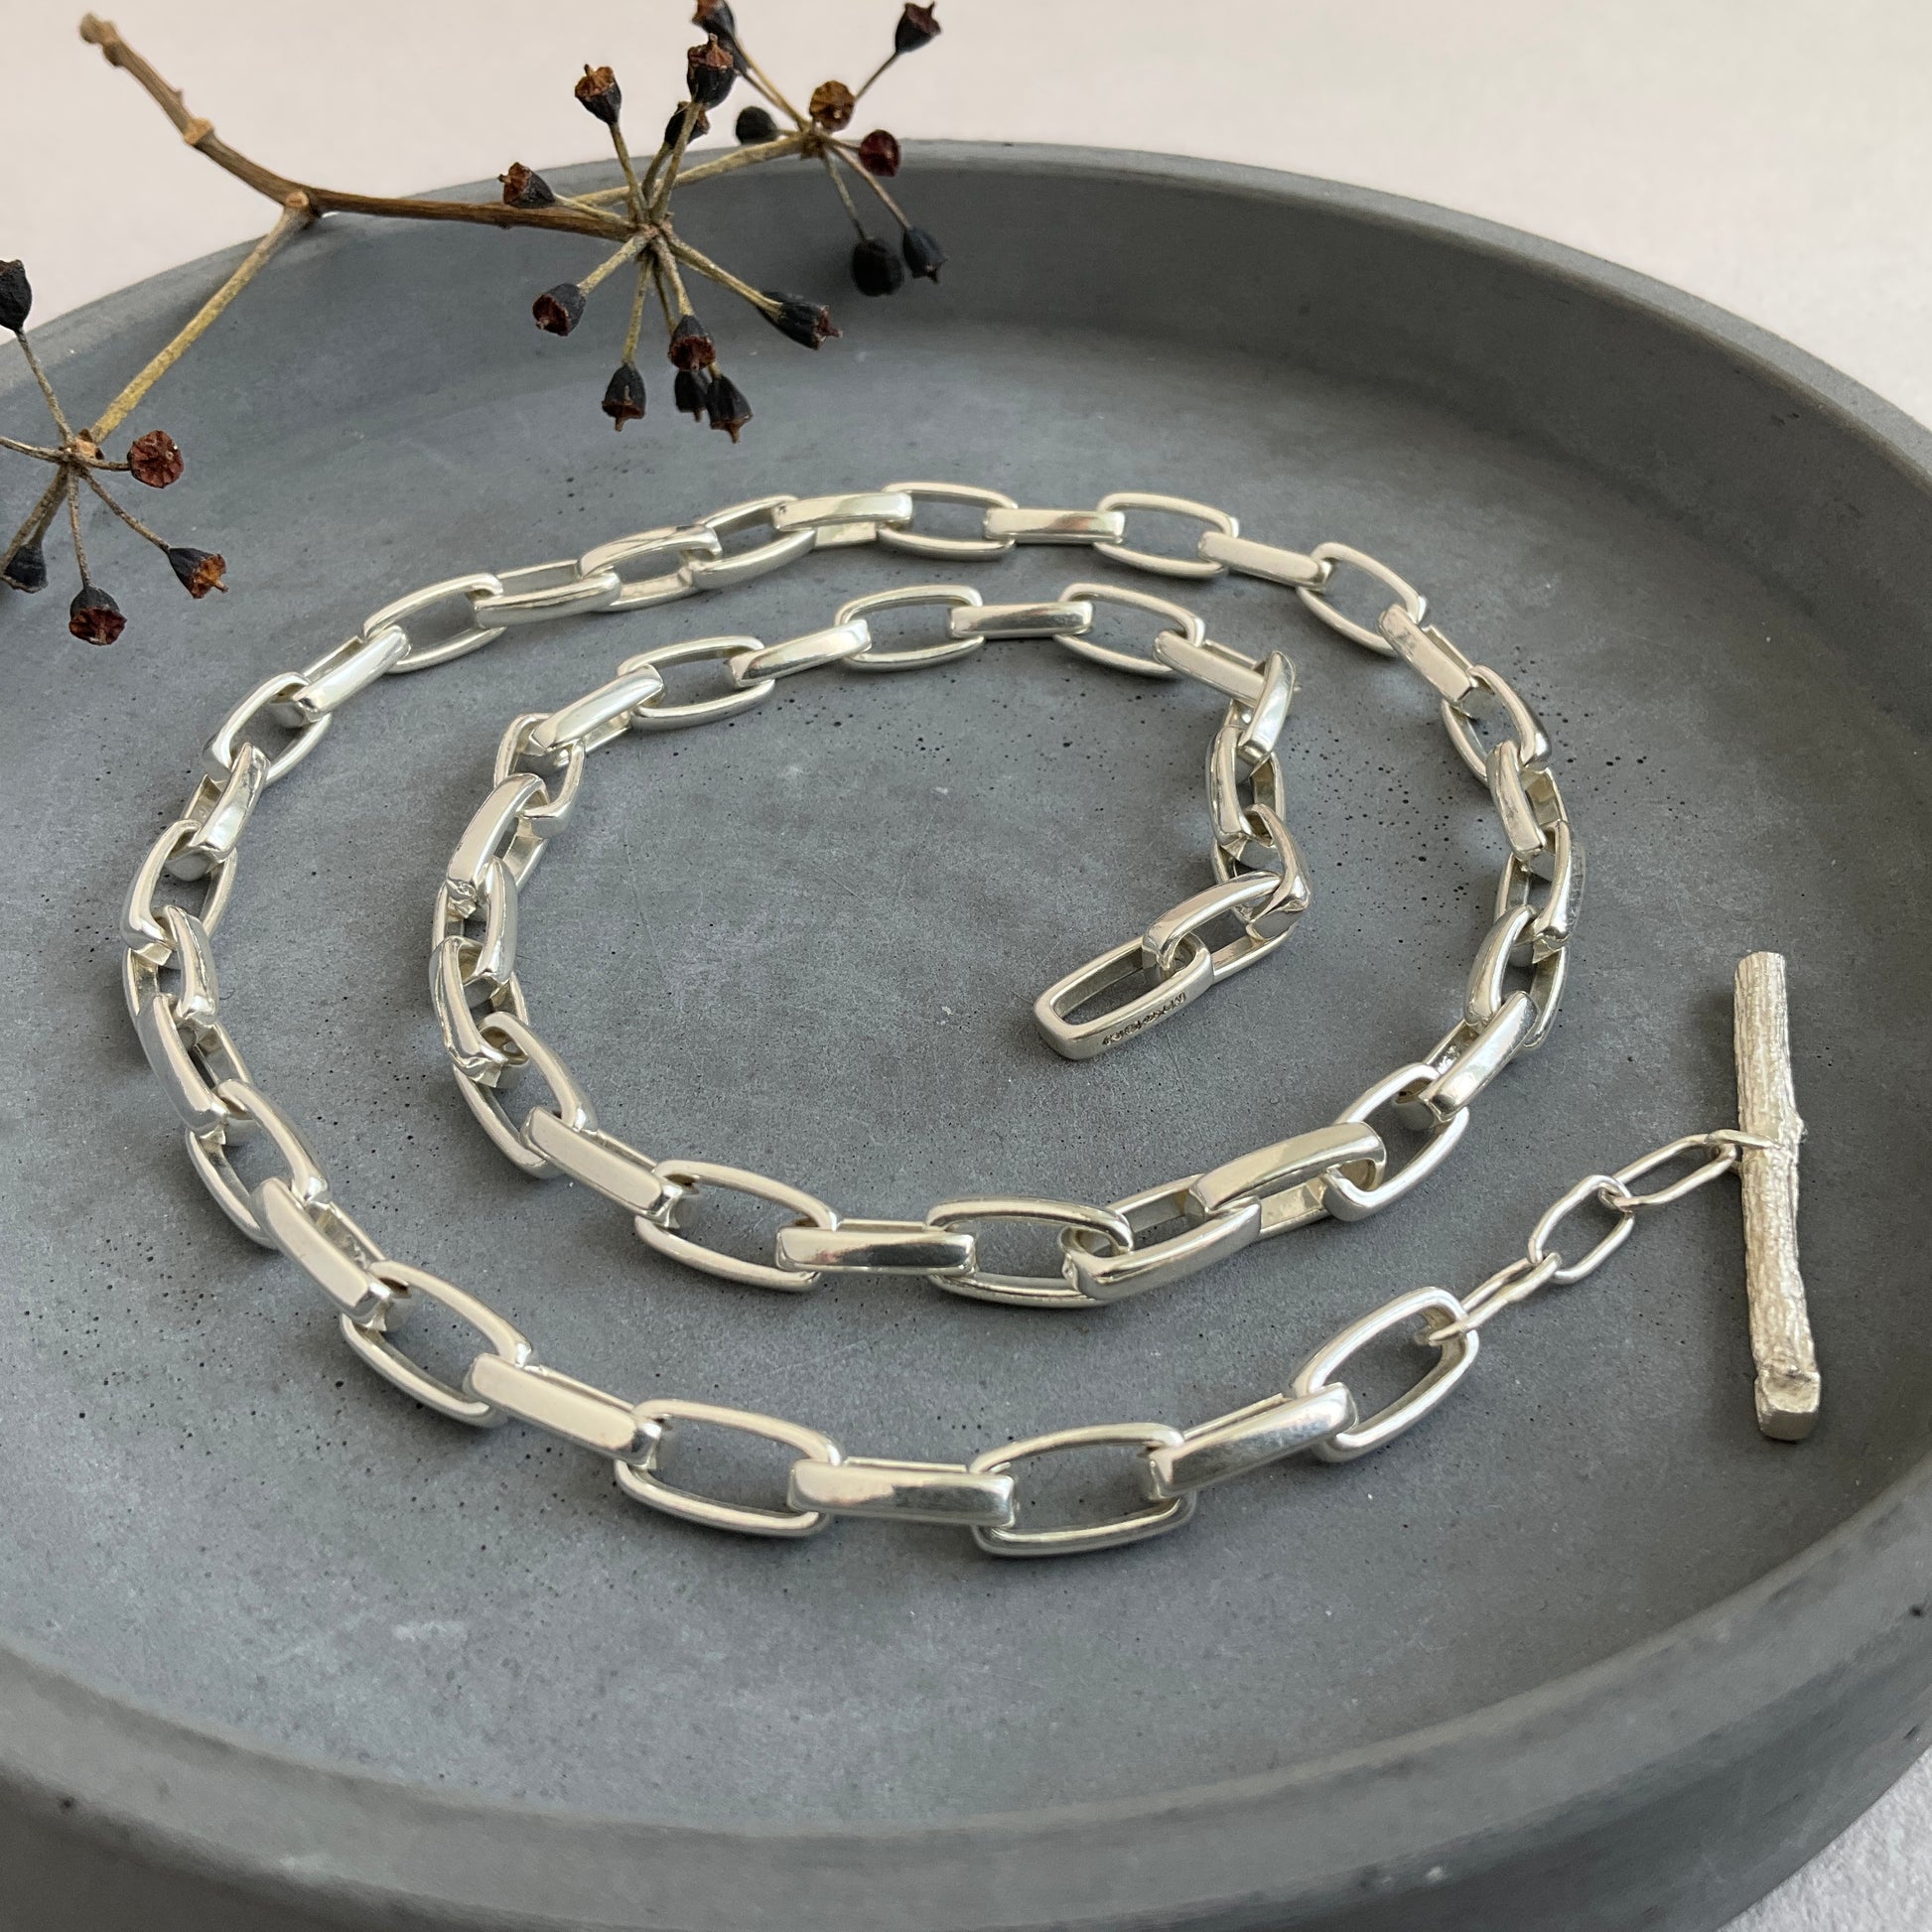 Tierra collection chunky chain in recycled sterling silver with mono casted twig clasp hallmarked by London Assay office. Displayed in a grey round dish with some black seeds on the left side 